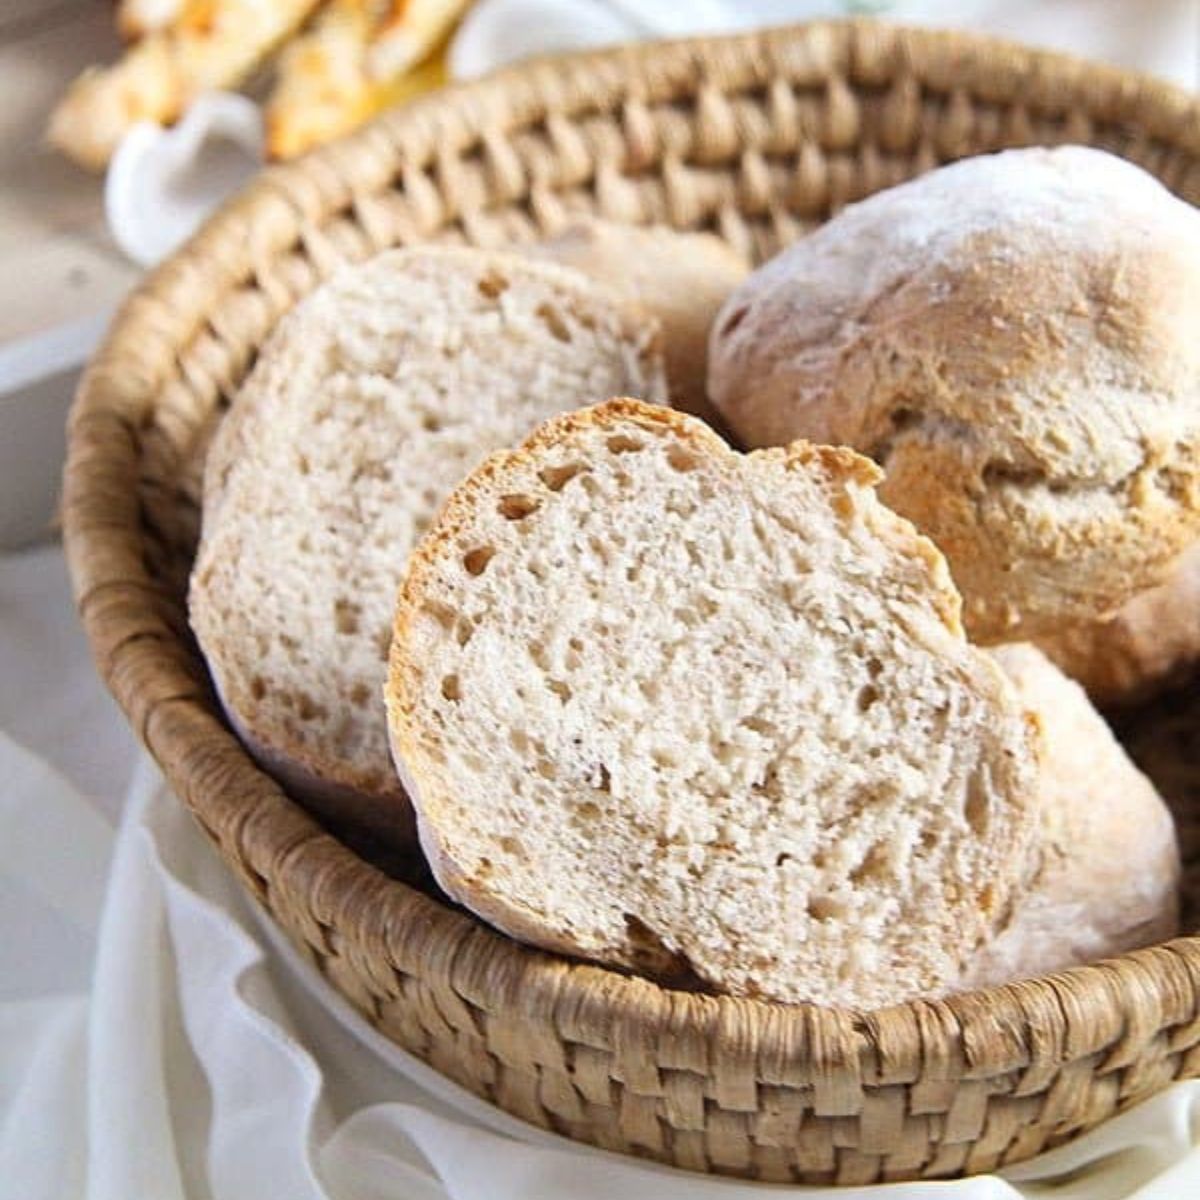 overnight yeast rolls in a small bread basket.